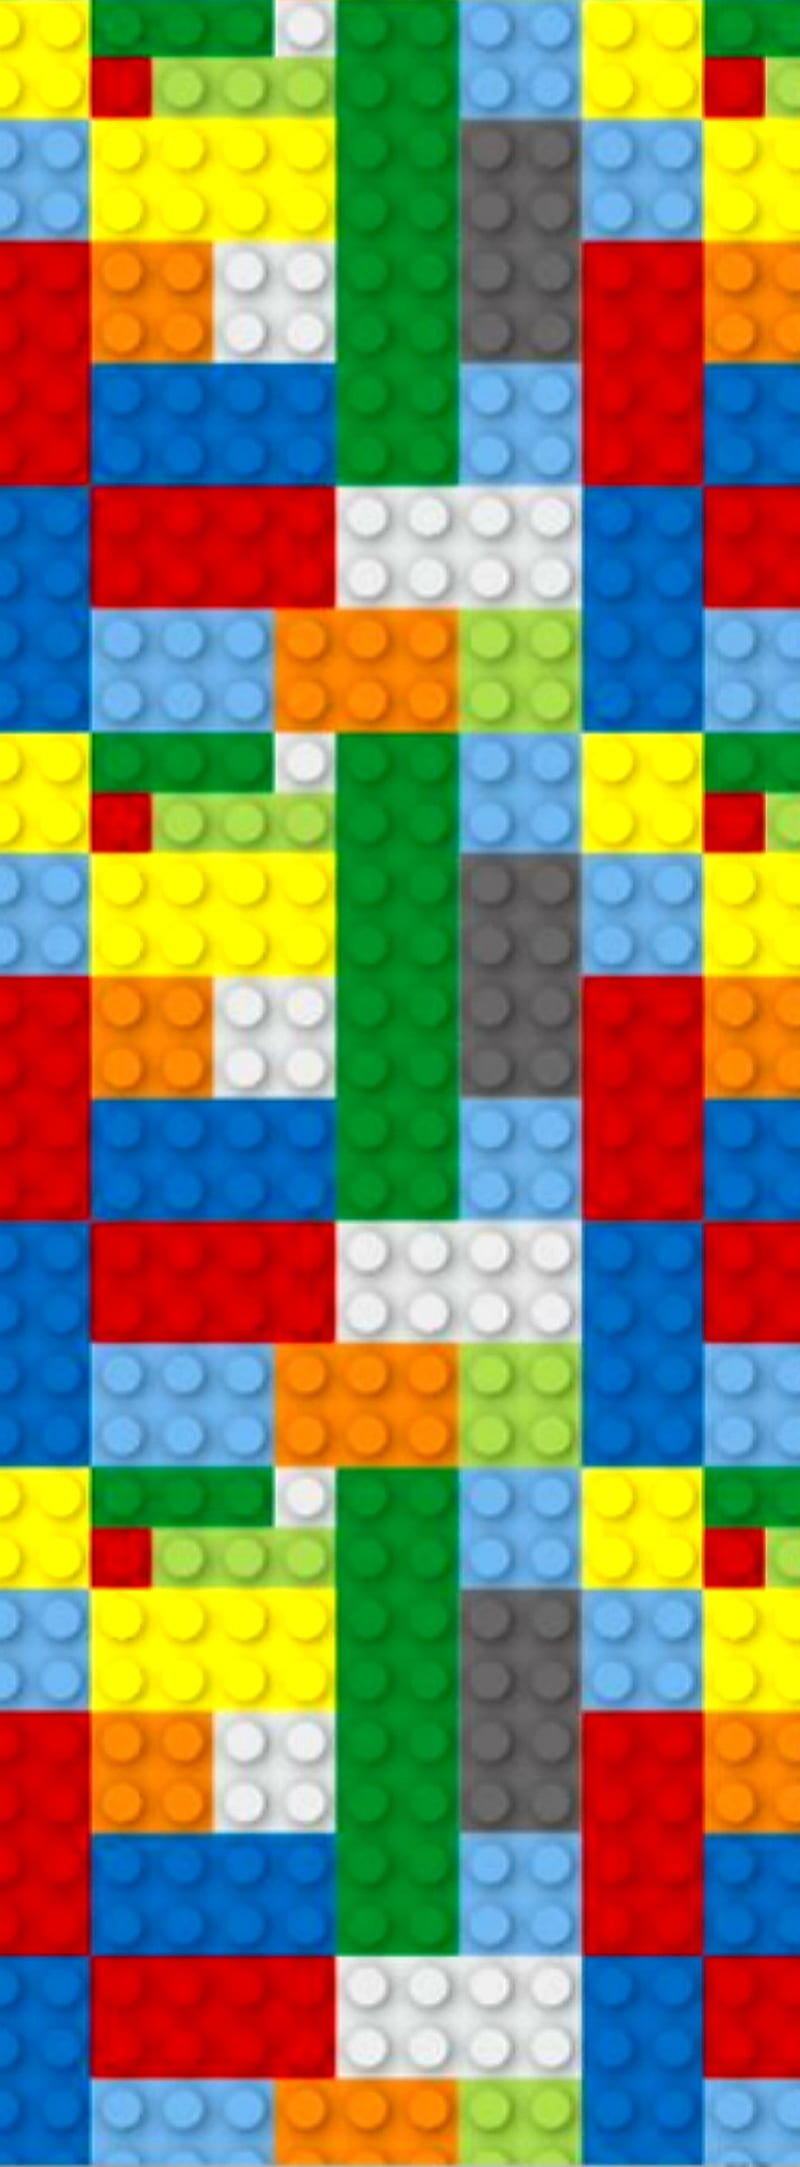 Download Lego wallpapers for mobile phone free Lego HD pictures